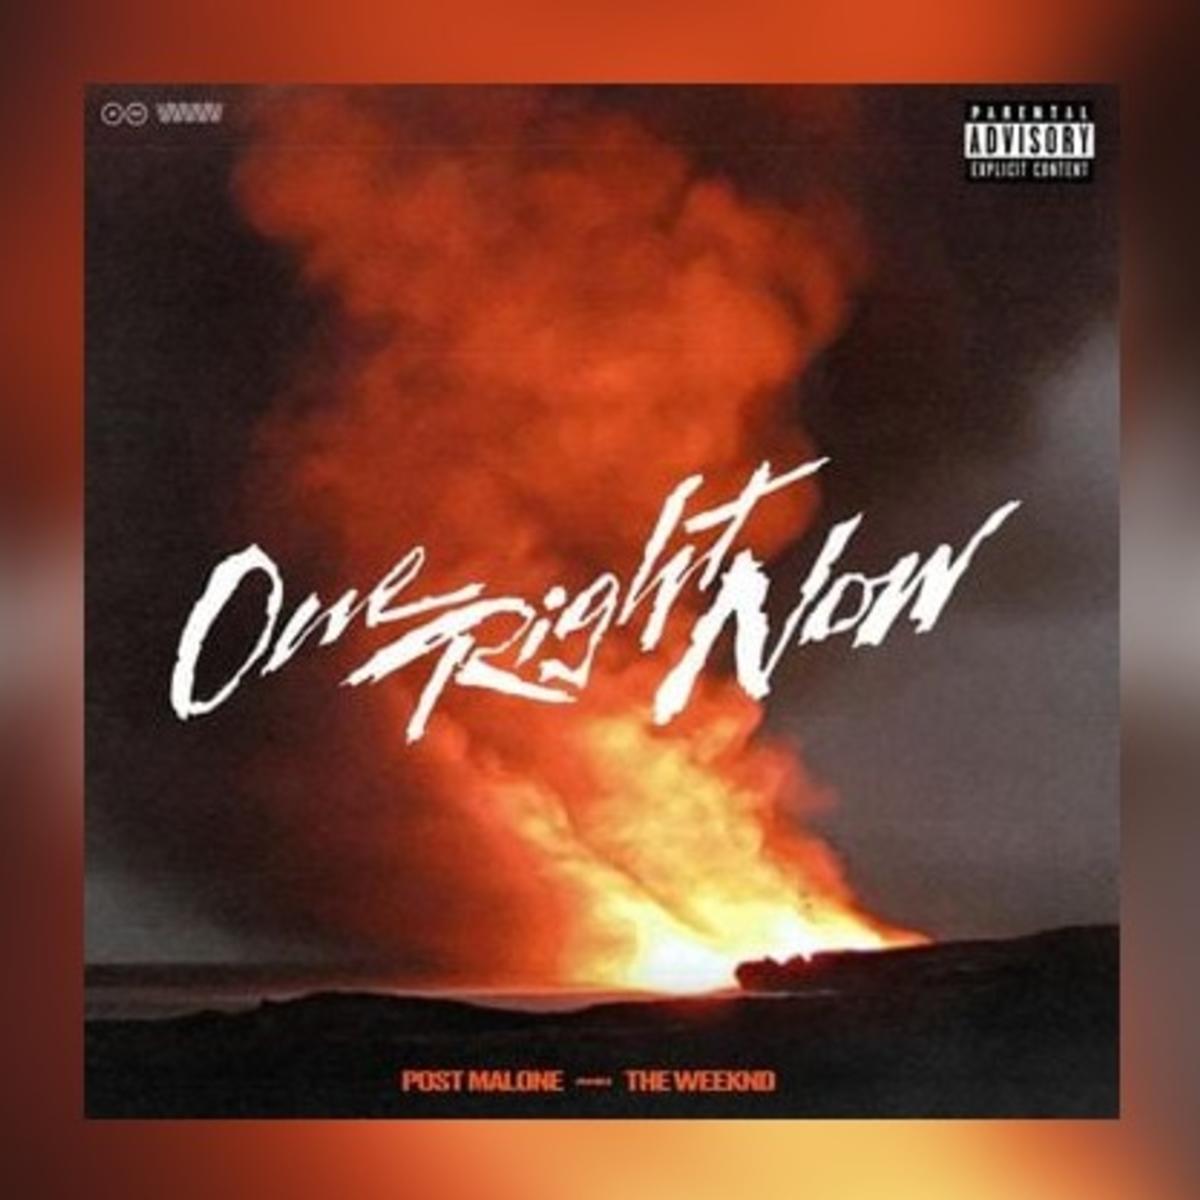 Post Malone & The Weeknd Link Up For “One Right Now”